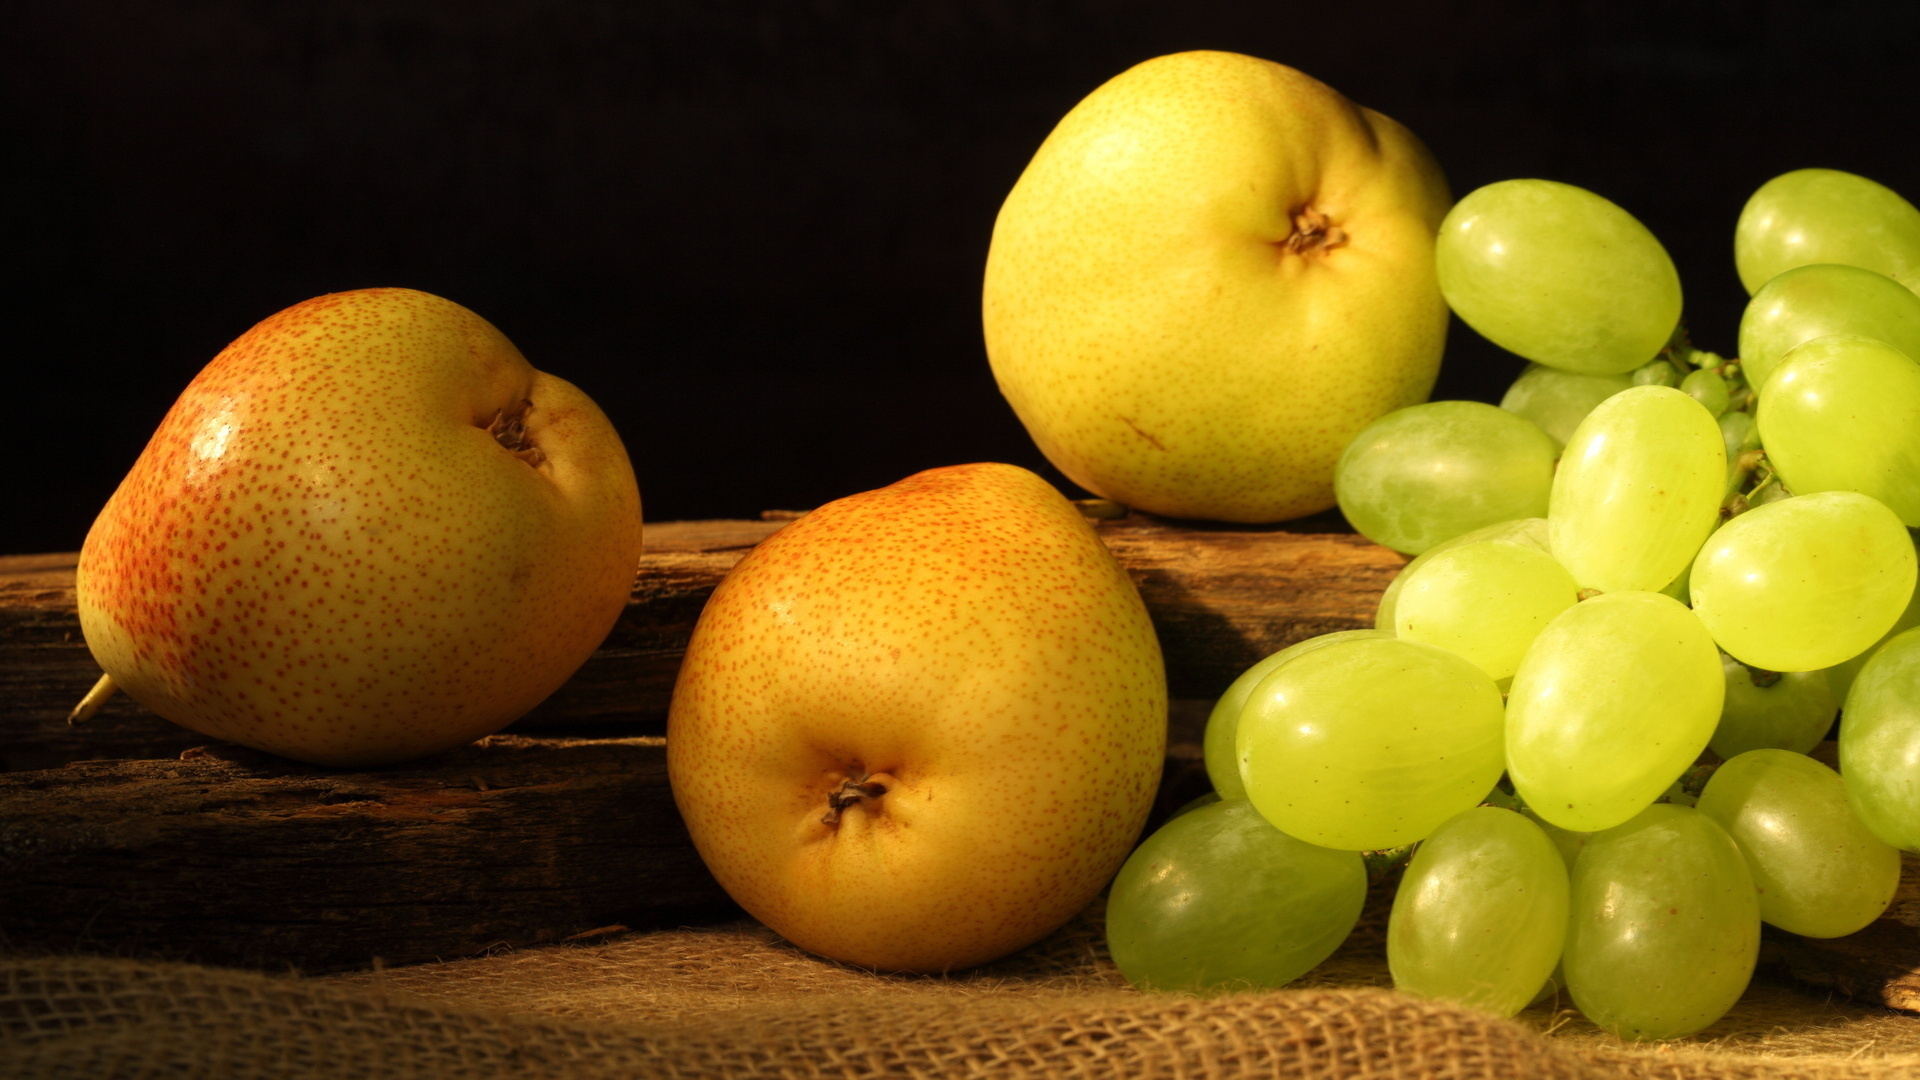 Wallpapers fruit grapes yellow on the desktop